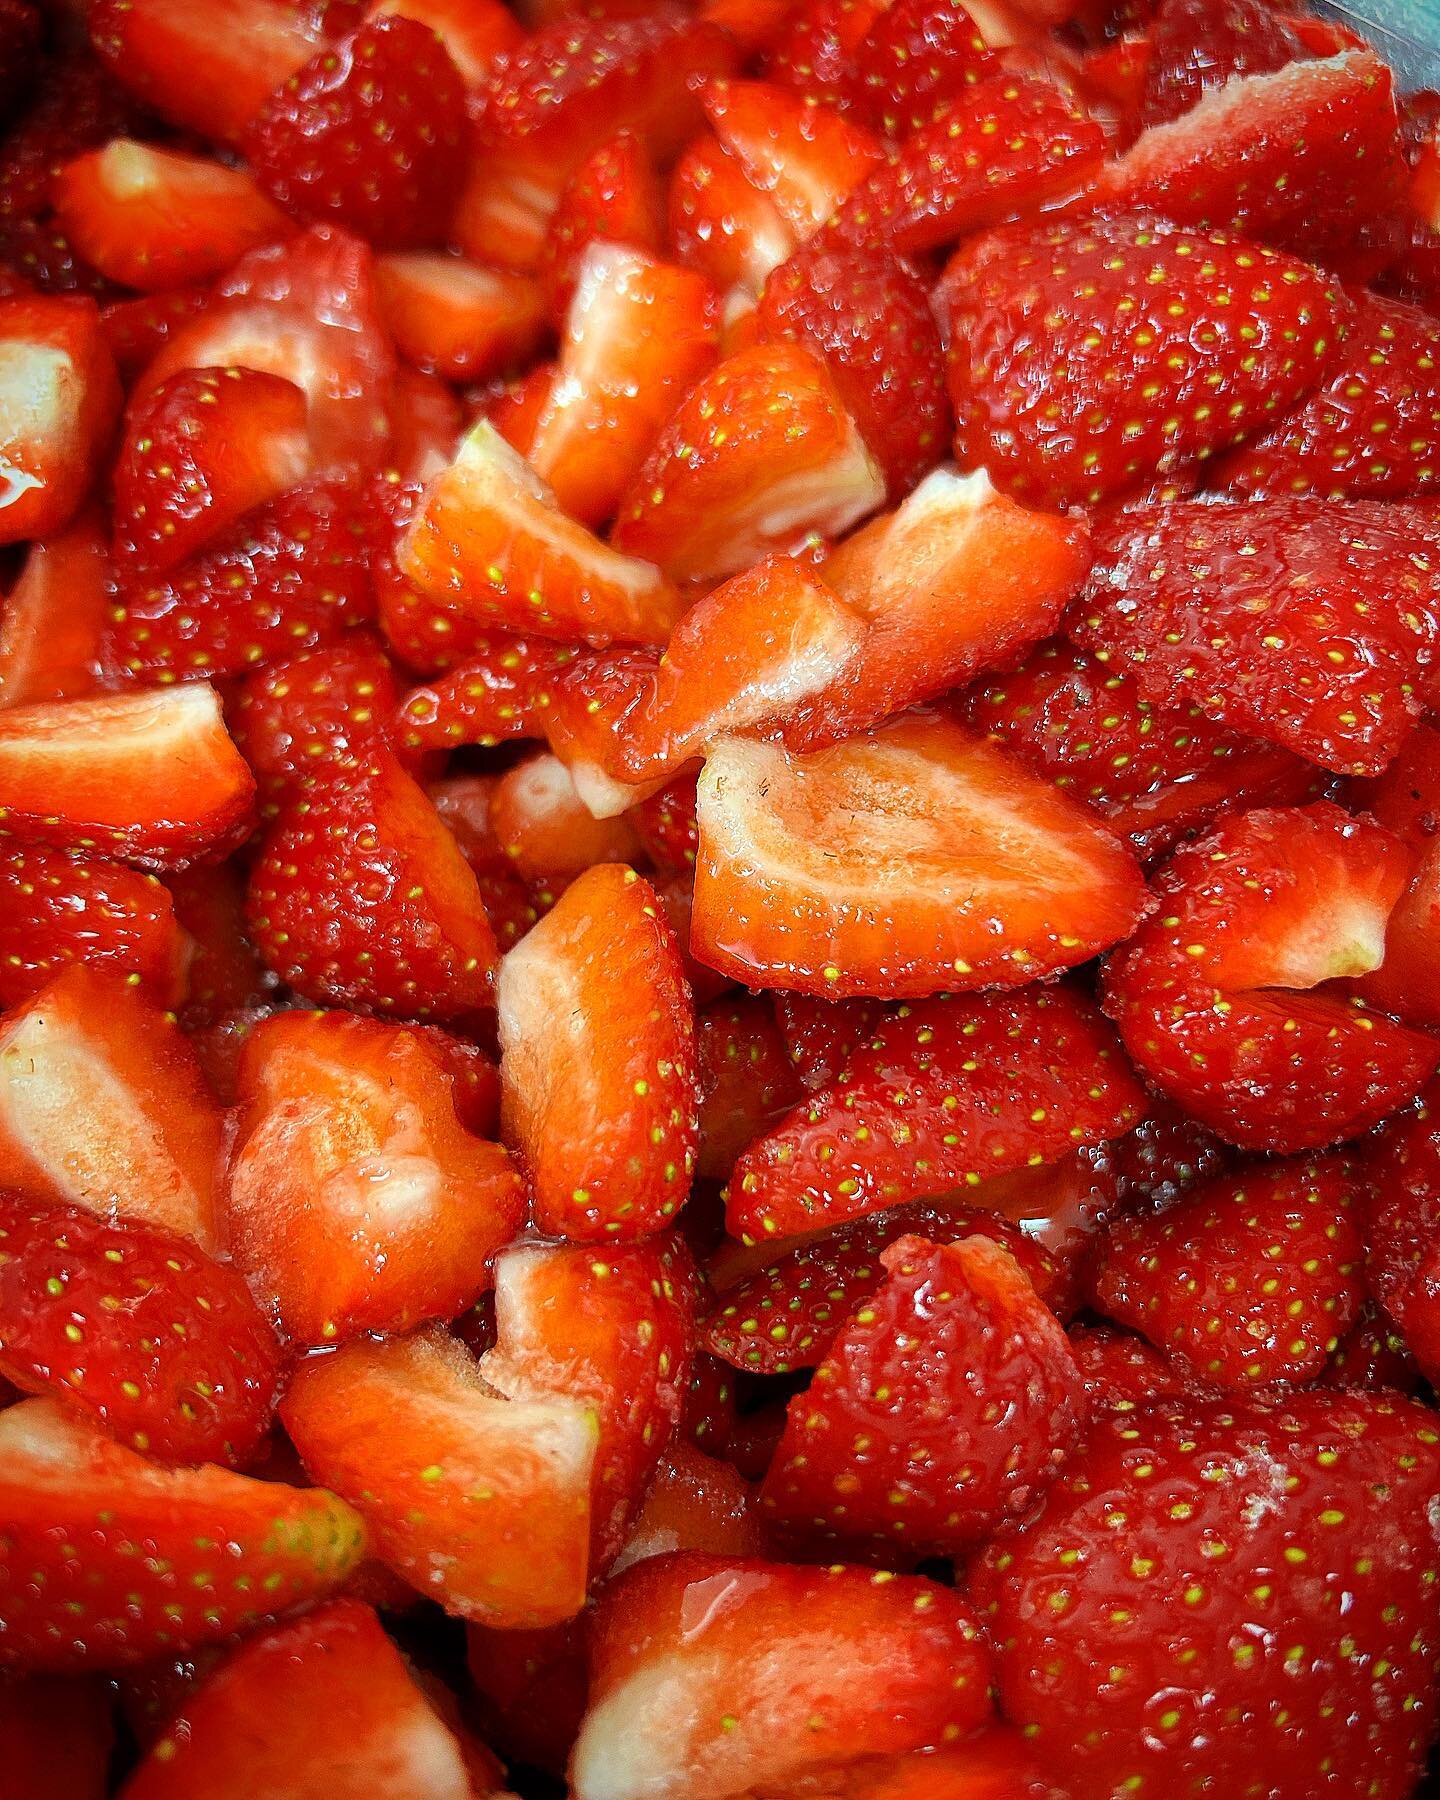 Freshest, ingredients always, NO EXCEPTIONS 🫡

Less then 24 hours after these Strawberries &amp; Raspberries arrive at our farm they&rsquo;ll be turned into ice-cream 🍦

The process: 

-Wash 🫧
-Chop &amp; Quarter 🔪
-Sprinkle with Sugar (helps rem